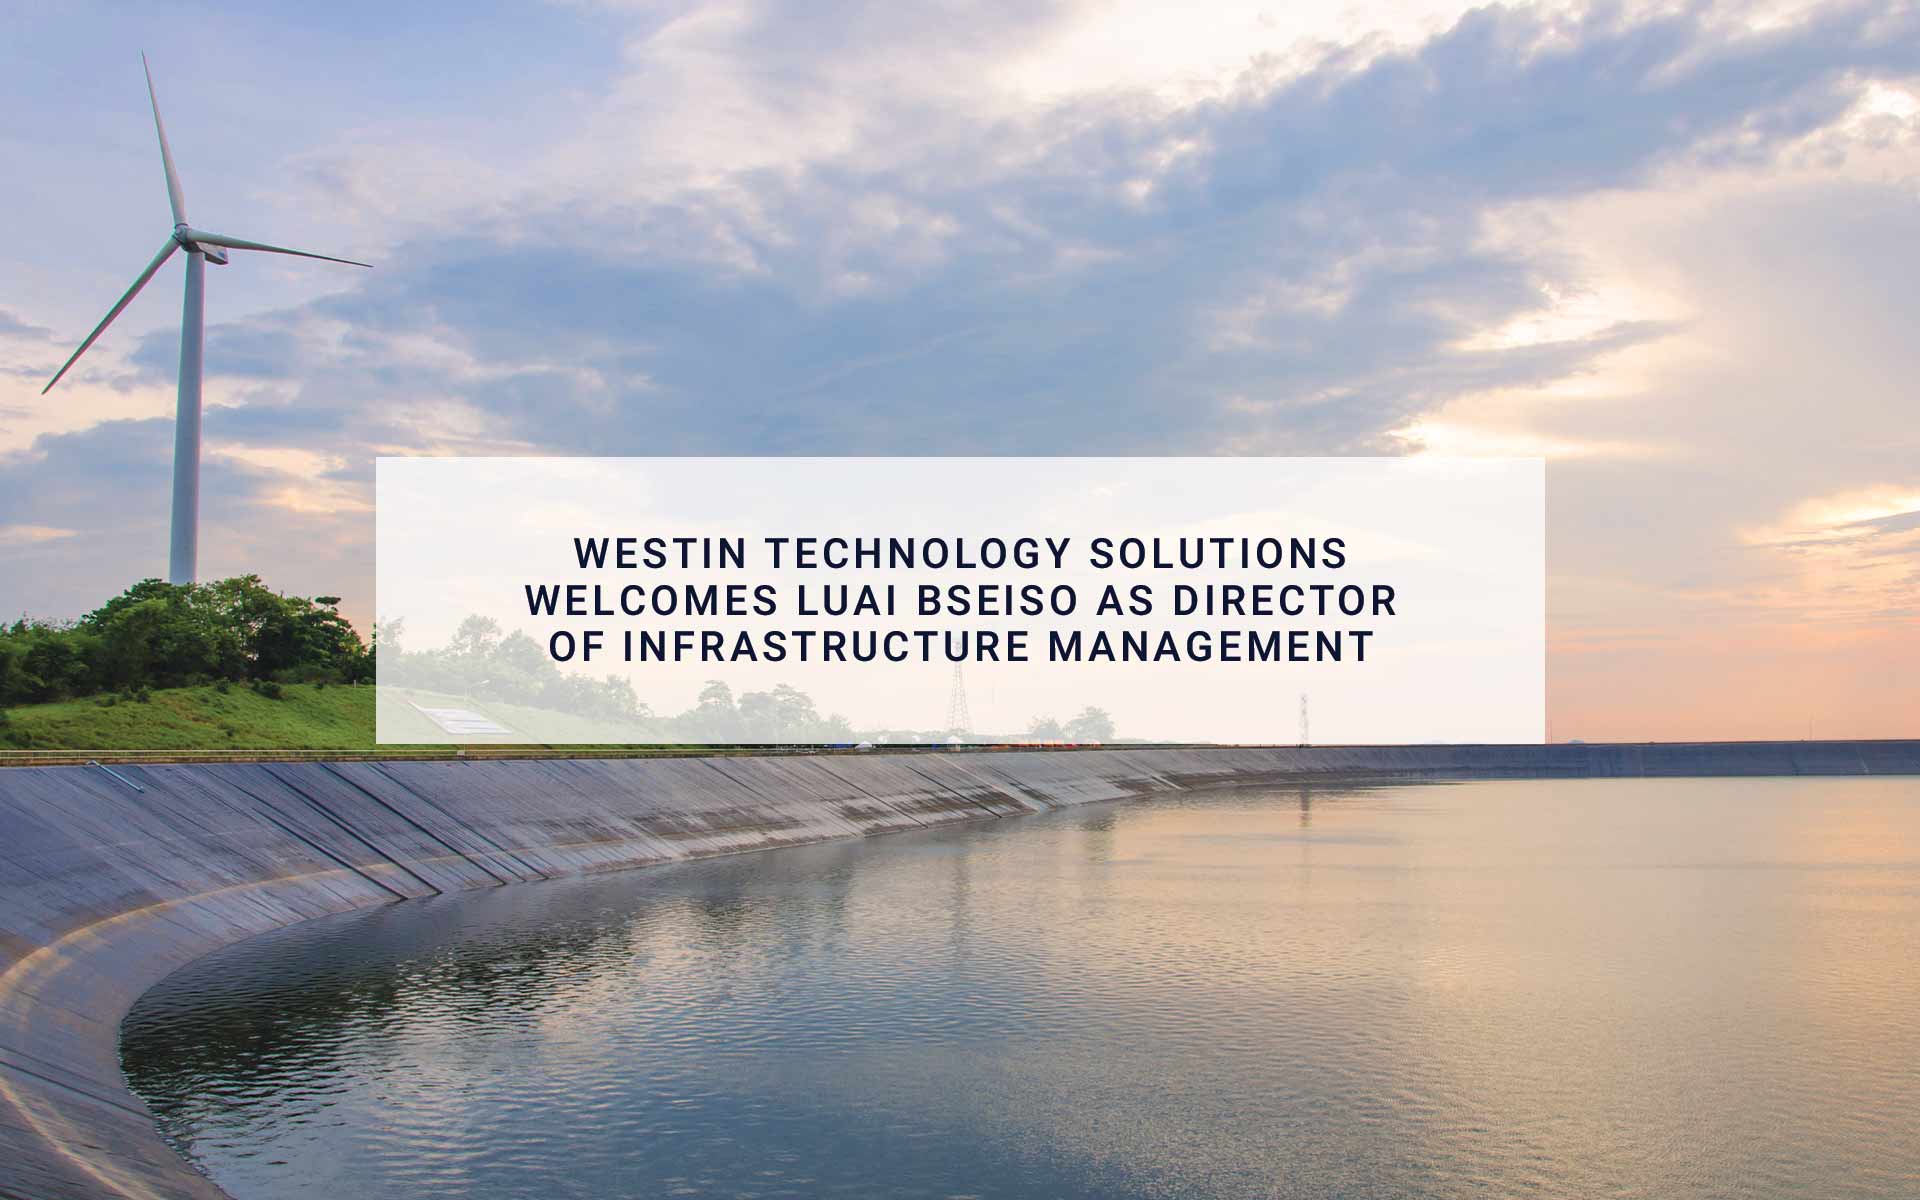 Westin Technology Solutions Welcomes Luai Bseiso as Director of Infrastructure Management